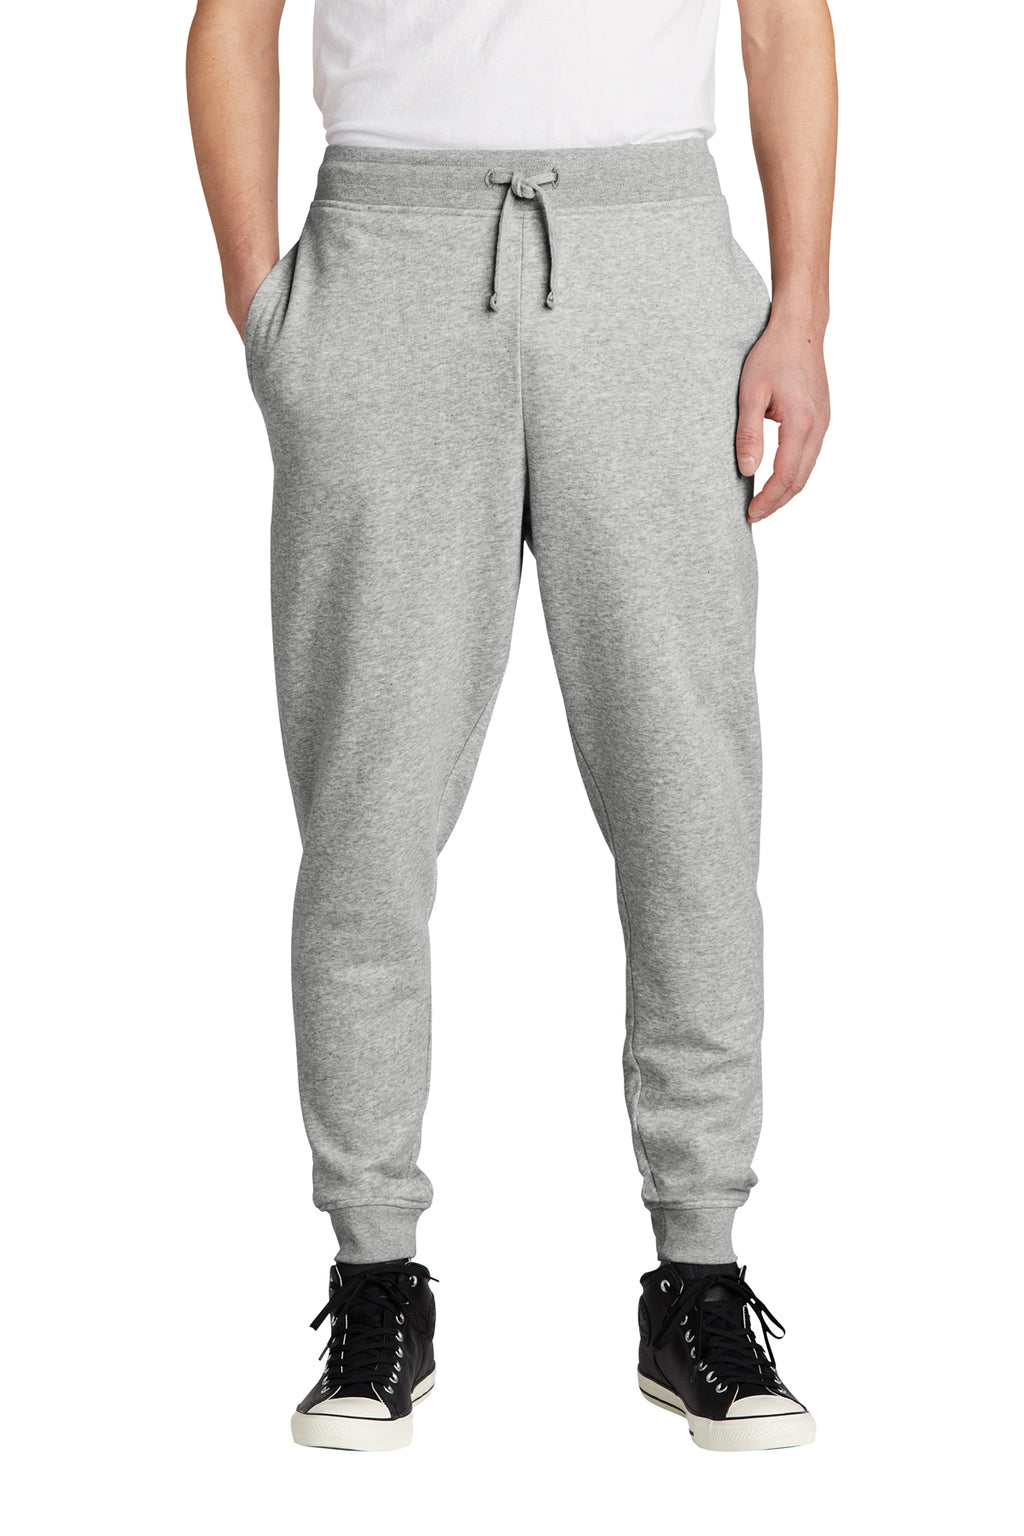 District Brand Fleece Jogger With Pockets grey